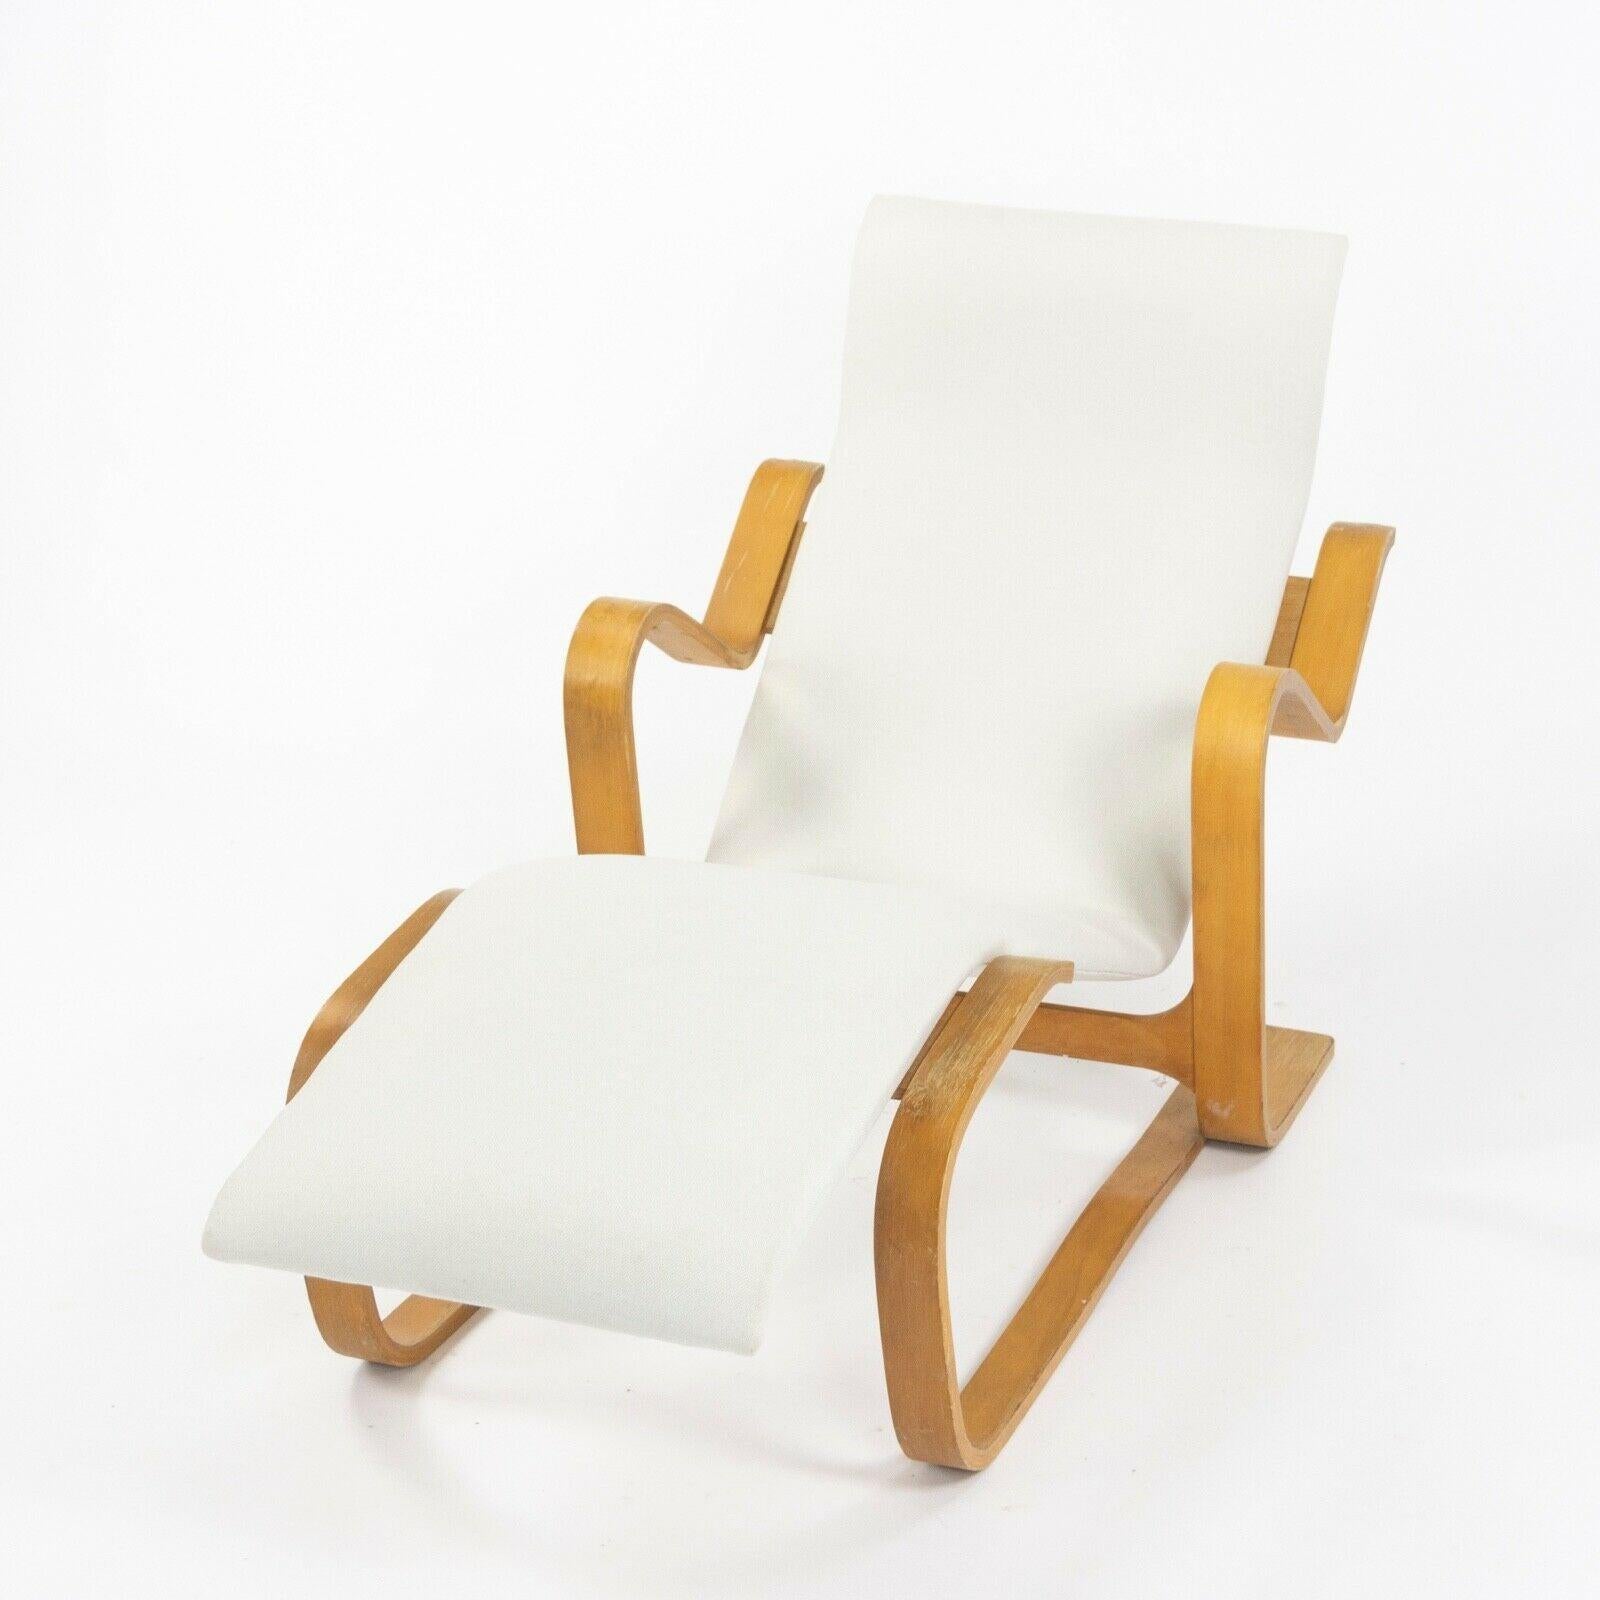 1960s Marcel Breuer for Knoll Isokon Chaise Lounge Chair New White Upholstery In Good Condition For Sale In Philadelphia, PA